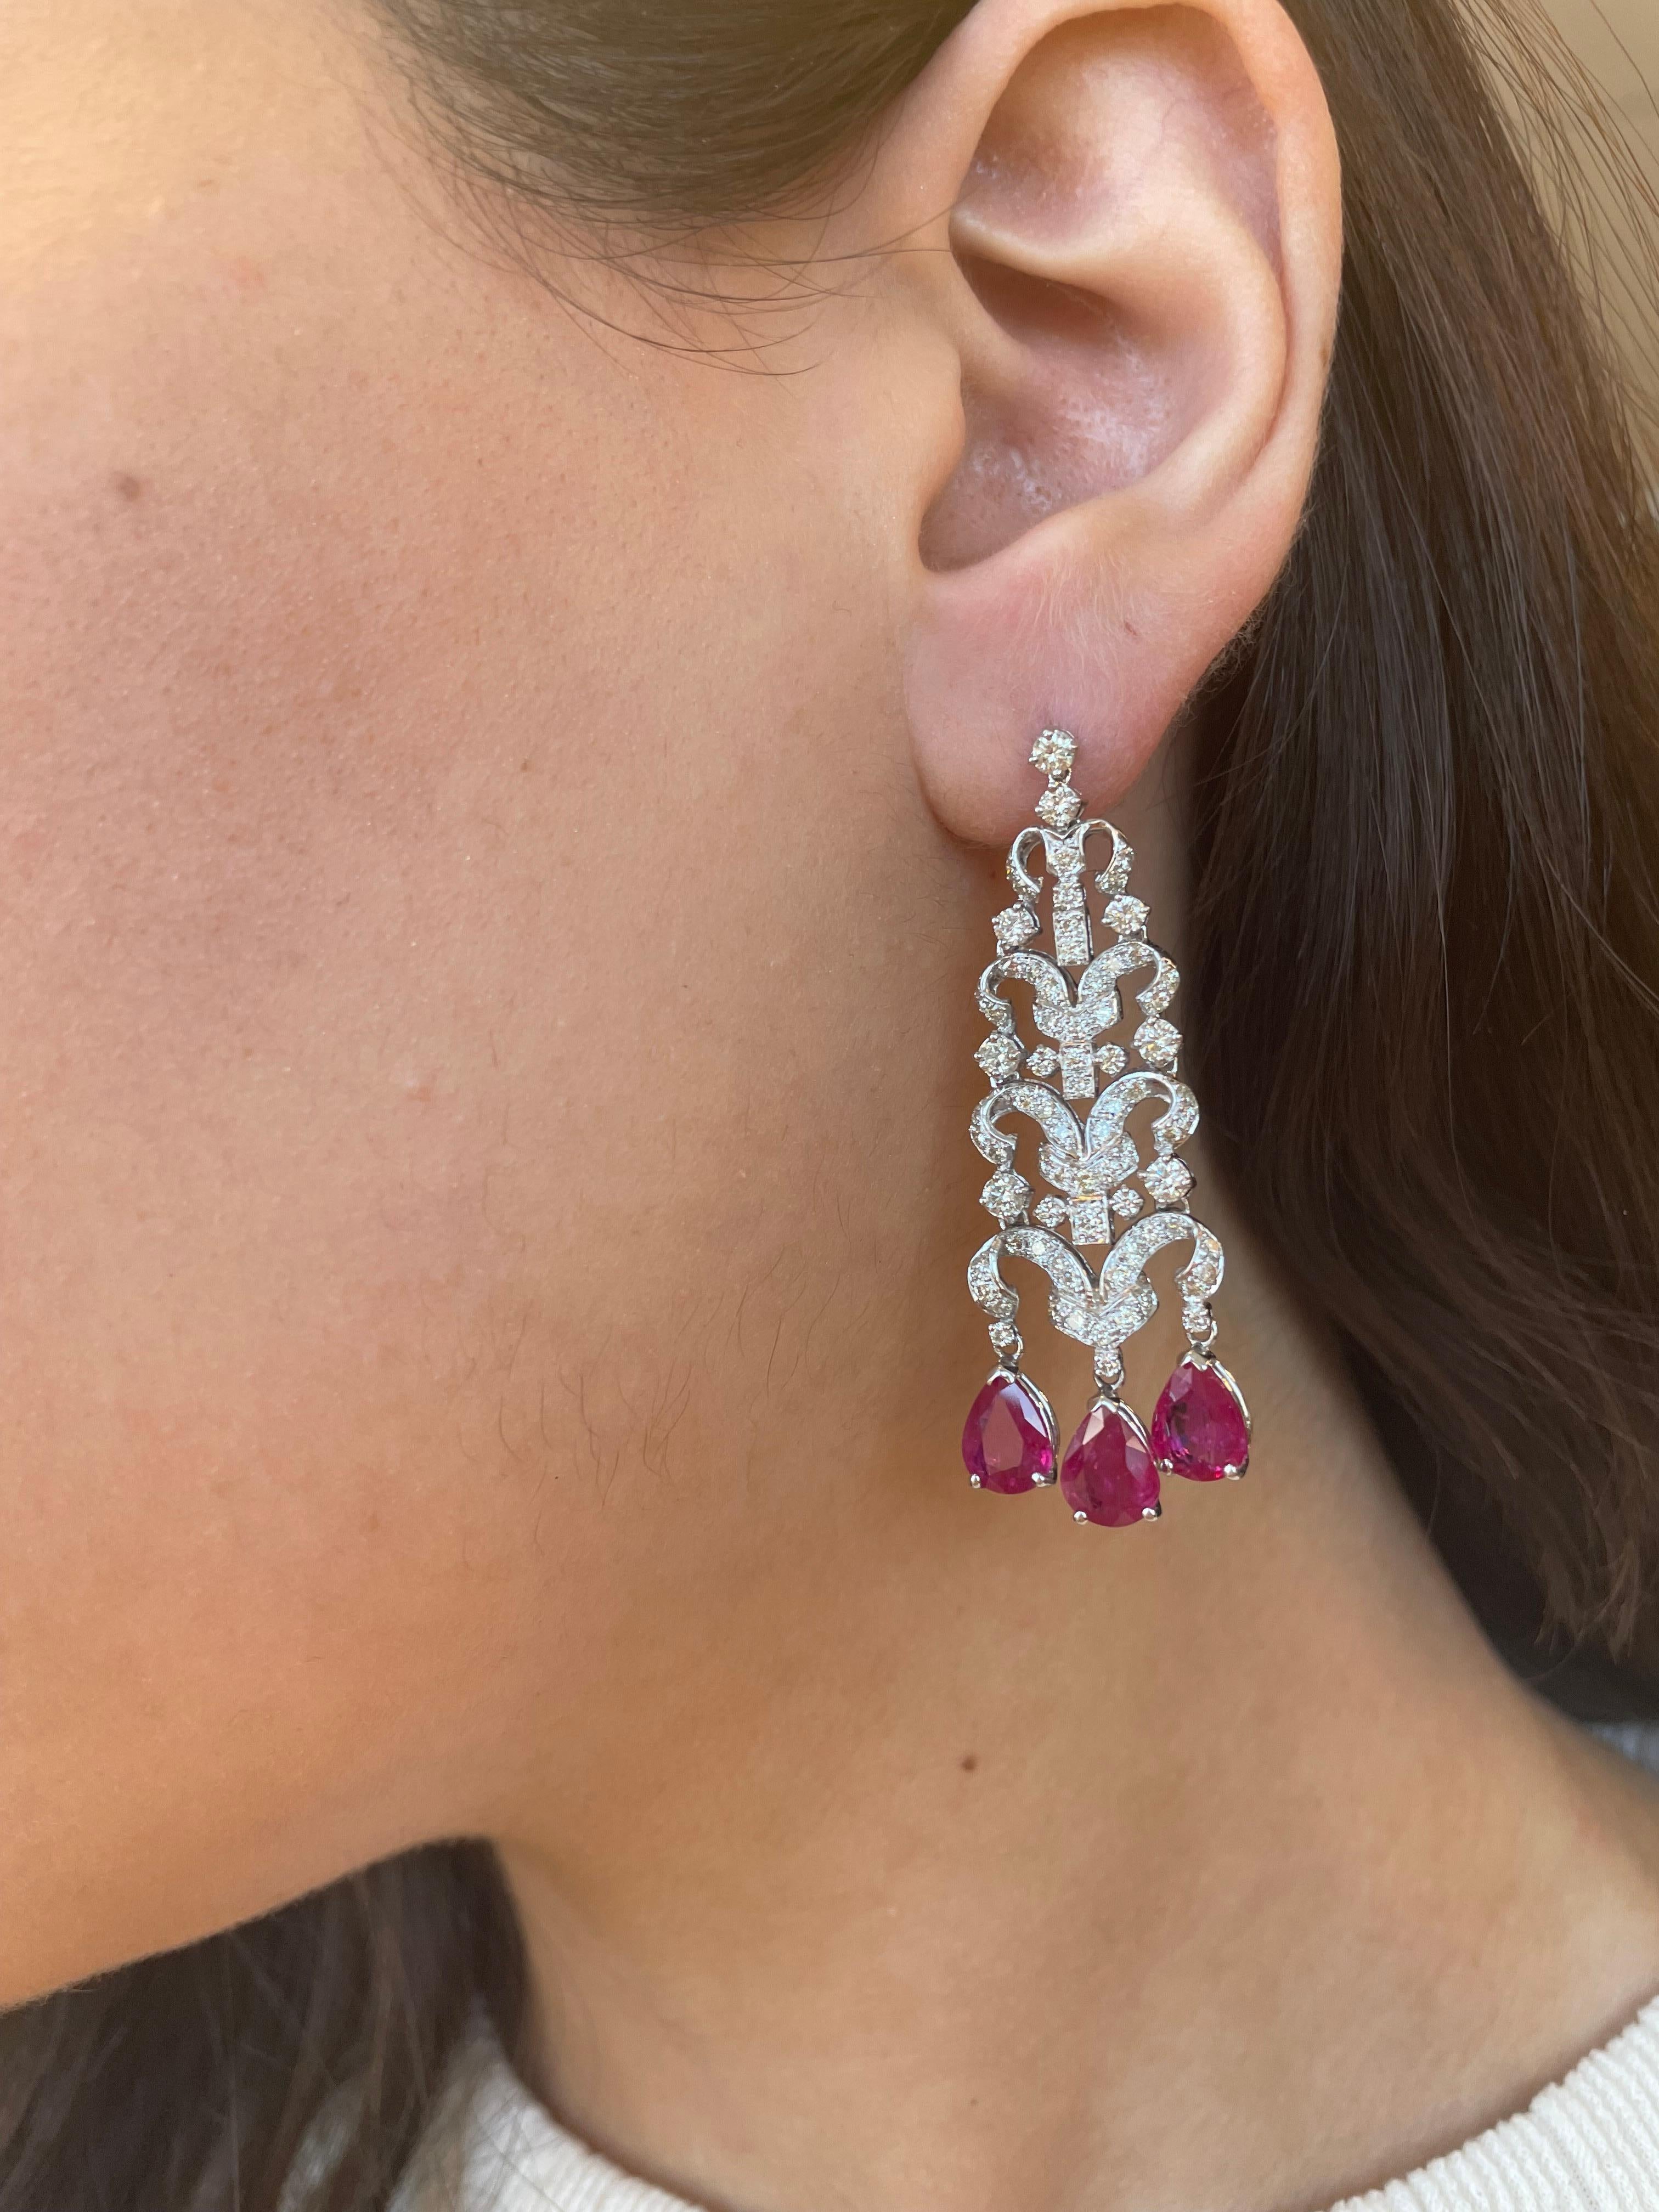 Stunning Edwardian inspired bezel set chandelier earrings.
6 pear shape rubies heat, 7.12 carats. Complimented by round brilliant diamonds, 3.06 carats. Approximately G/H color grade and SI clarity grade. Prong set with milgrain work, 18k white